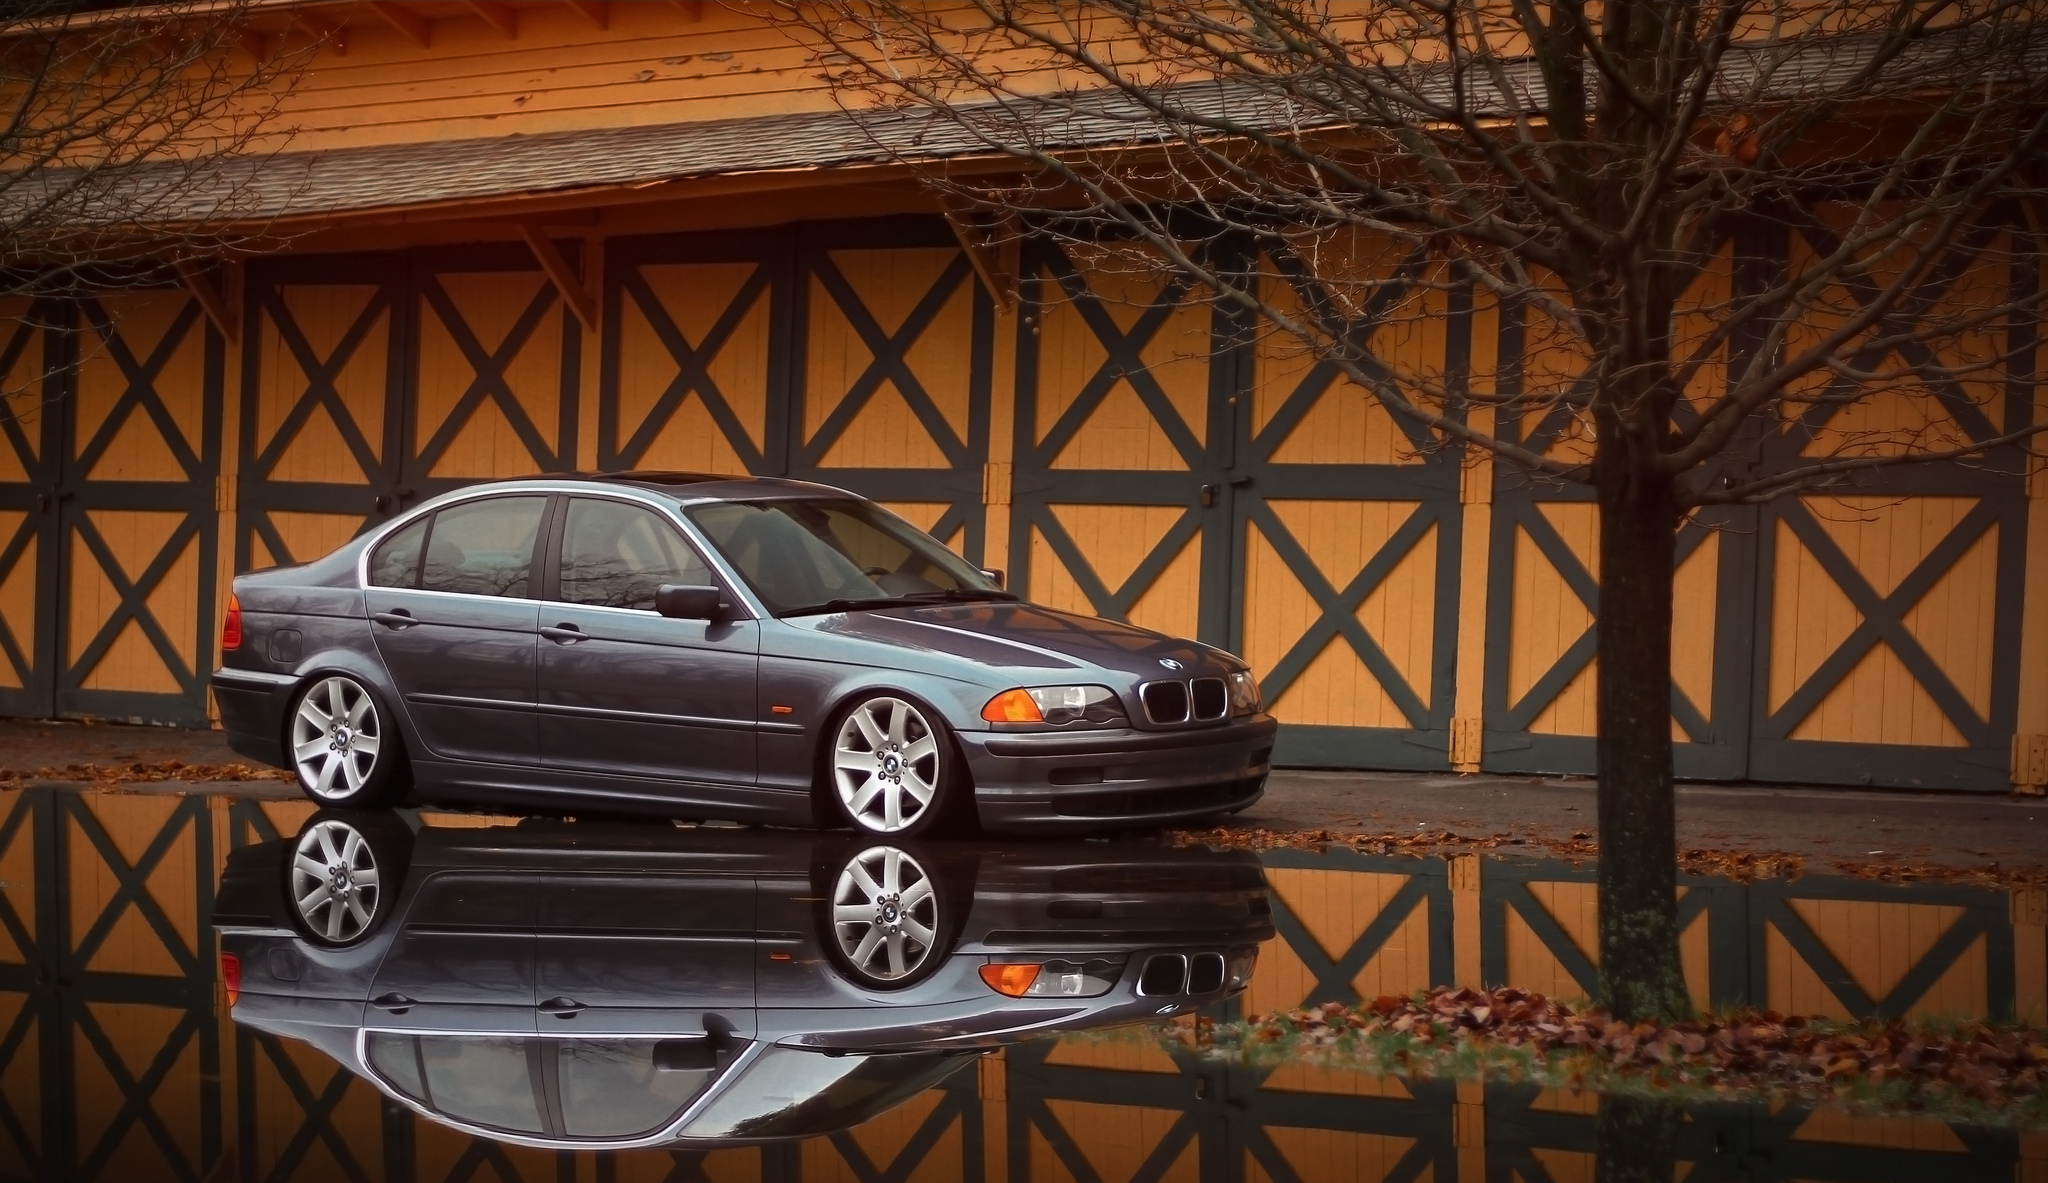 e46, bmw, cars, reflection, side view